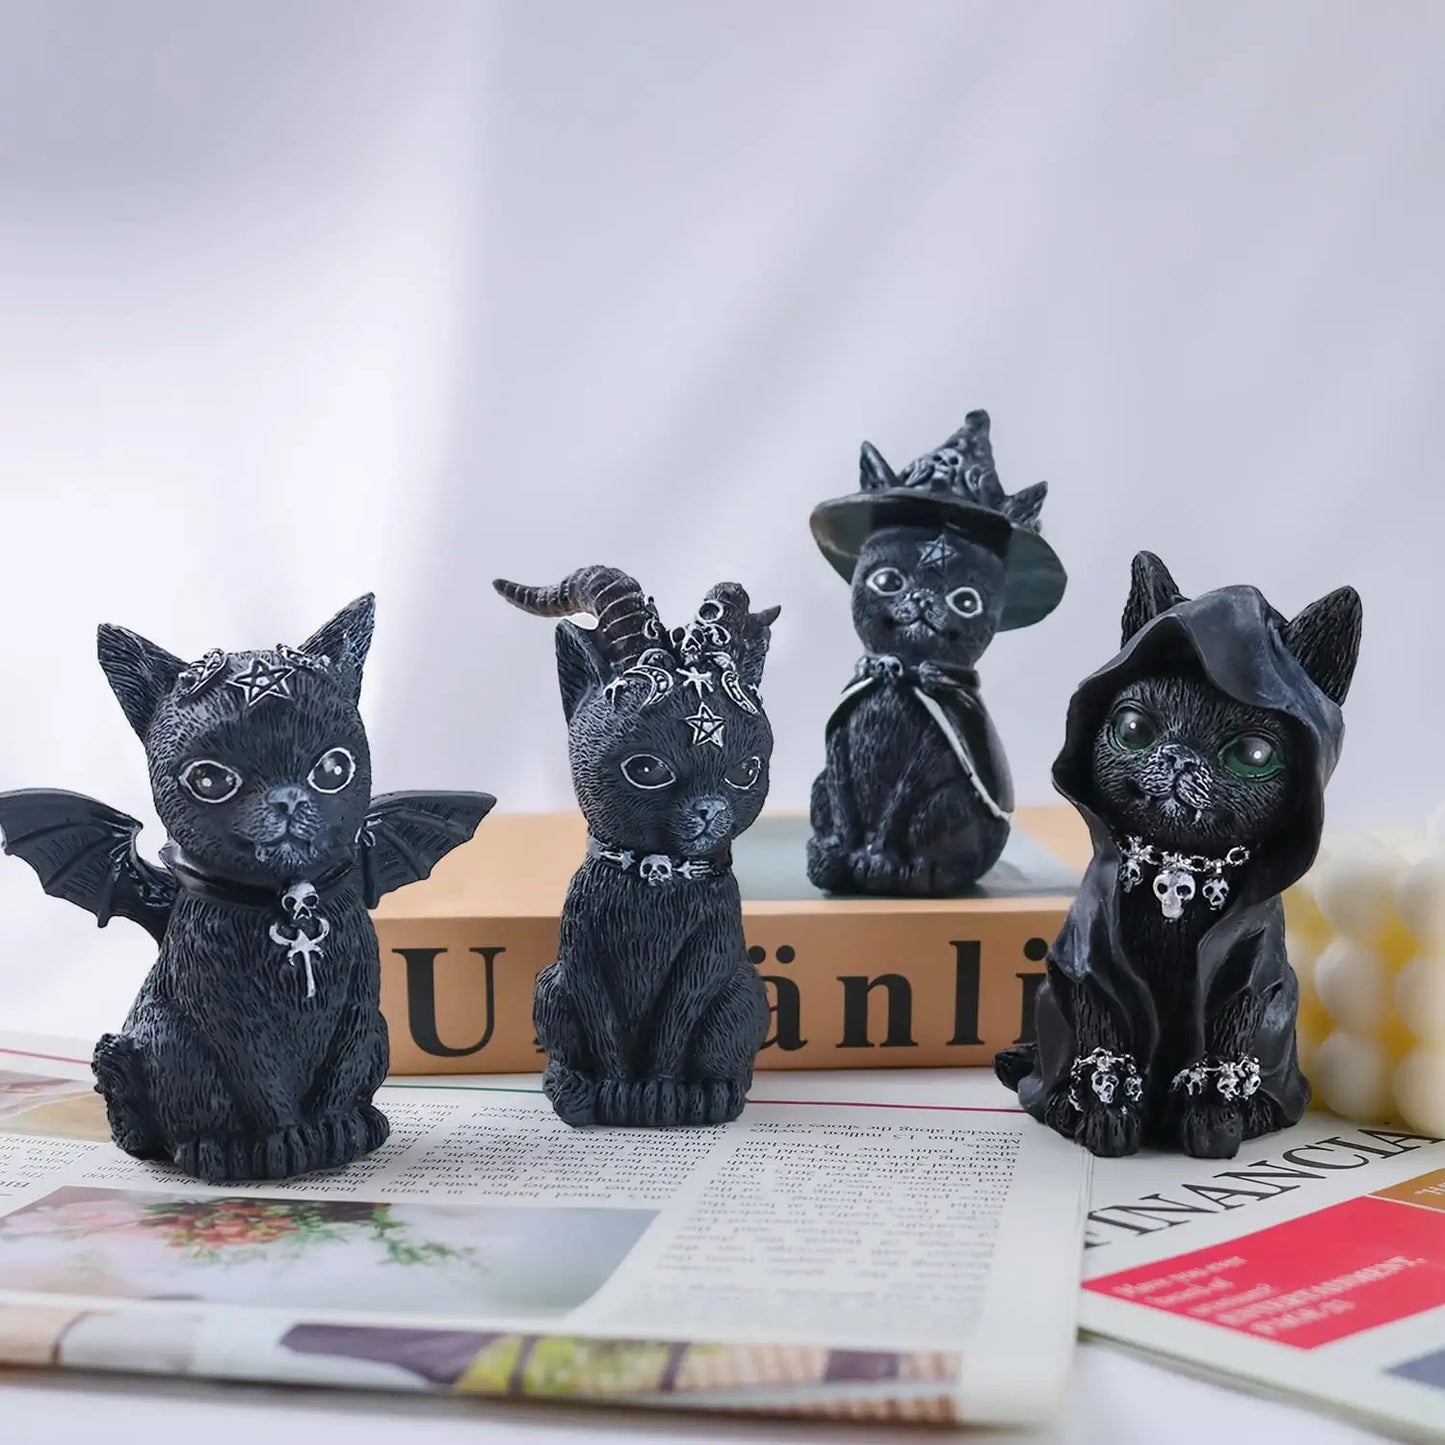 Four clack cat figurines dressed up as wizards